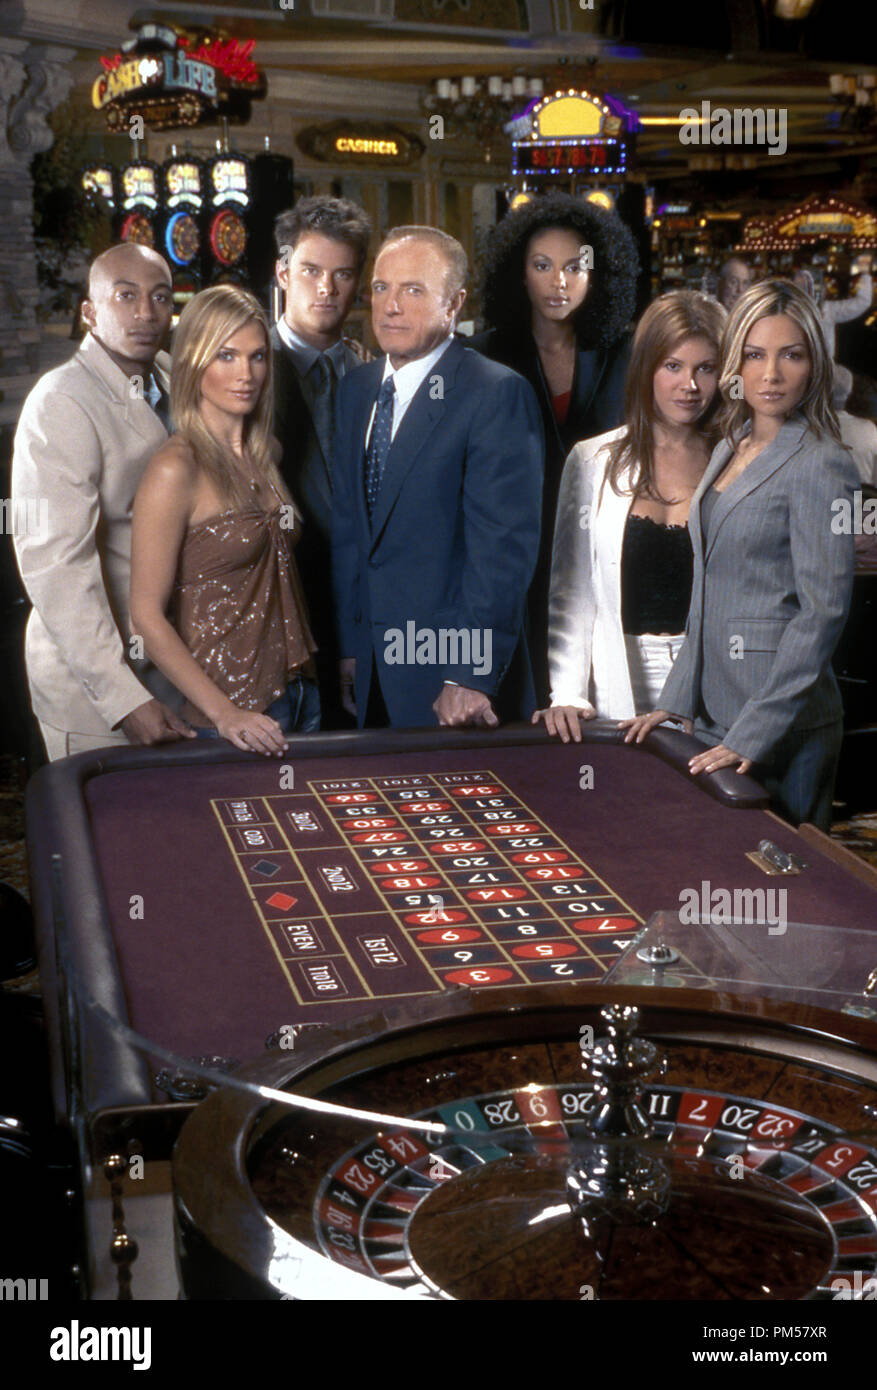 Film Still from 'Las Vegas' James Lesure, Molly Sims, Josh Duhamel, James Caan, Vanessa Marcil, Nikki Cox, Marsha Thomason circa 2004  File Reference # 30735451THA  For Editorial Use Only -  All Rights Reserved Stock Photo